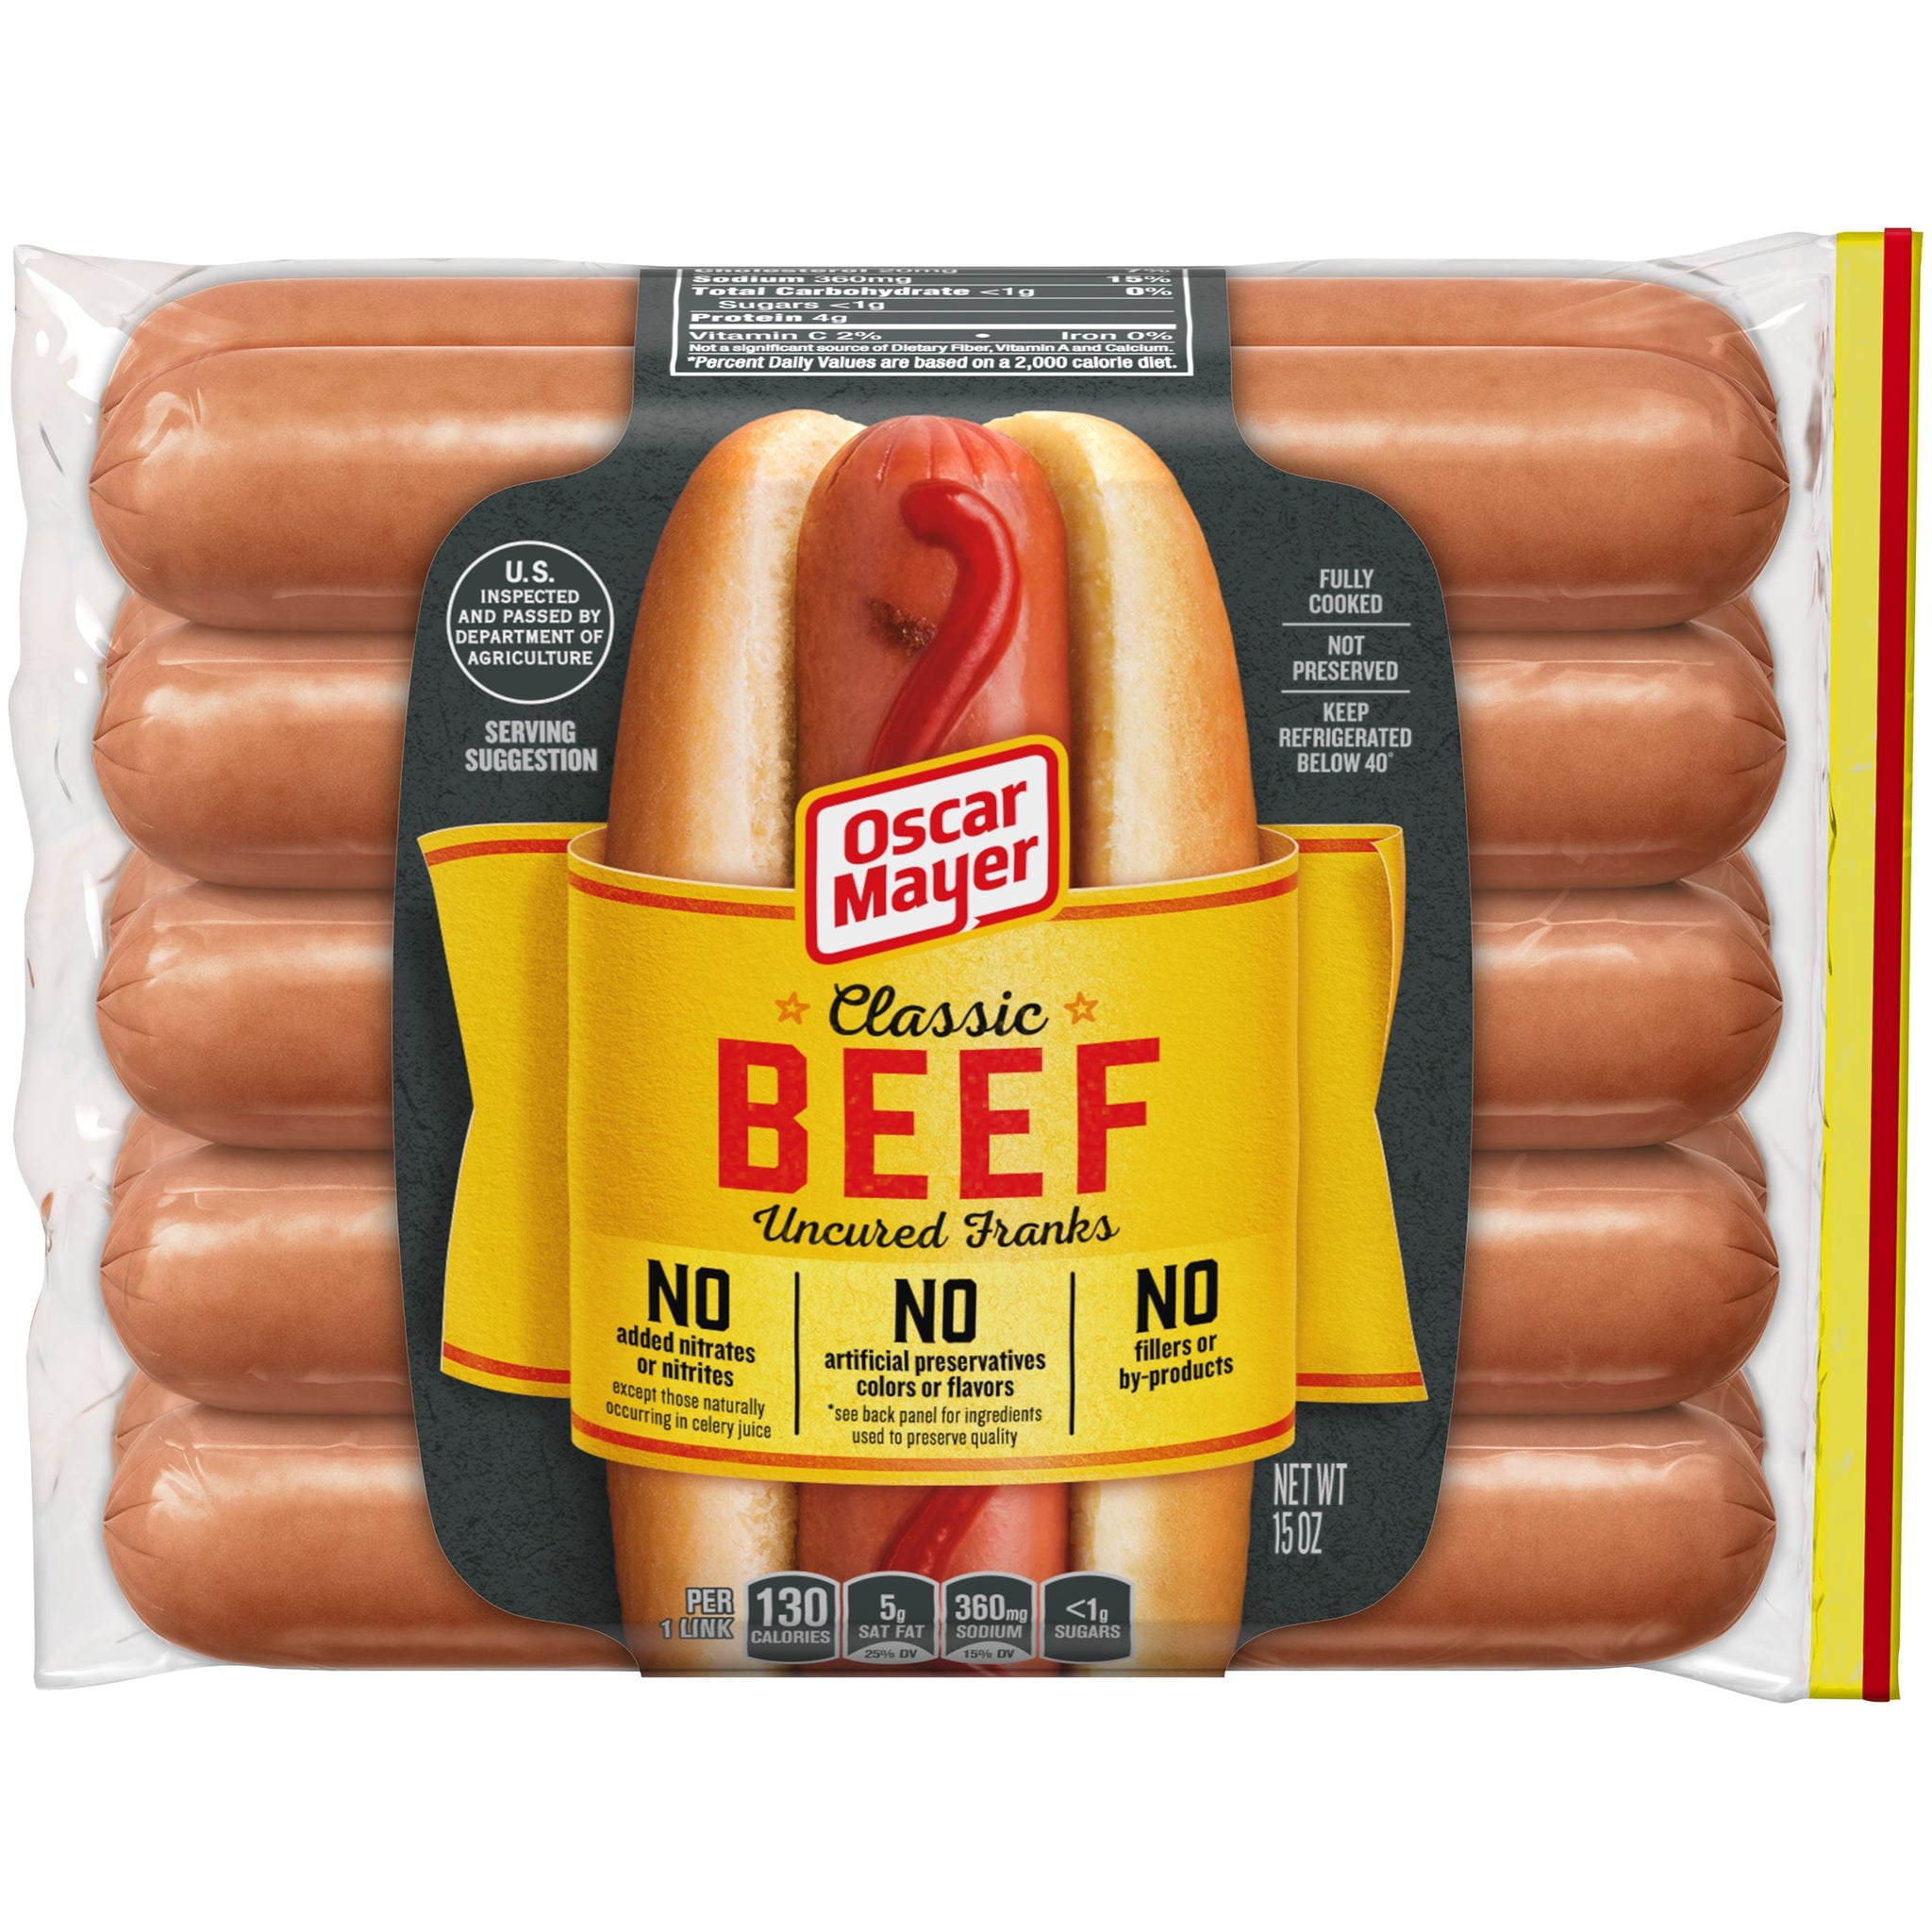 stl>Oscar Mayer Hot Dogs, Beef - Pack of 10